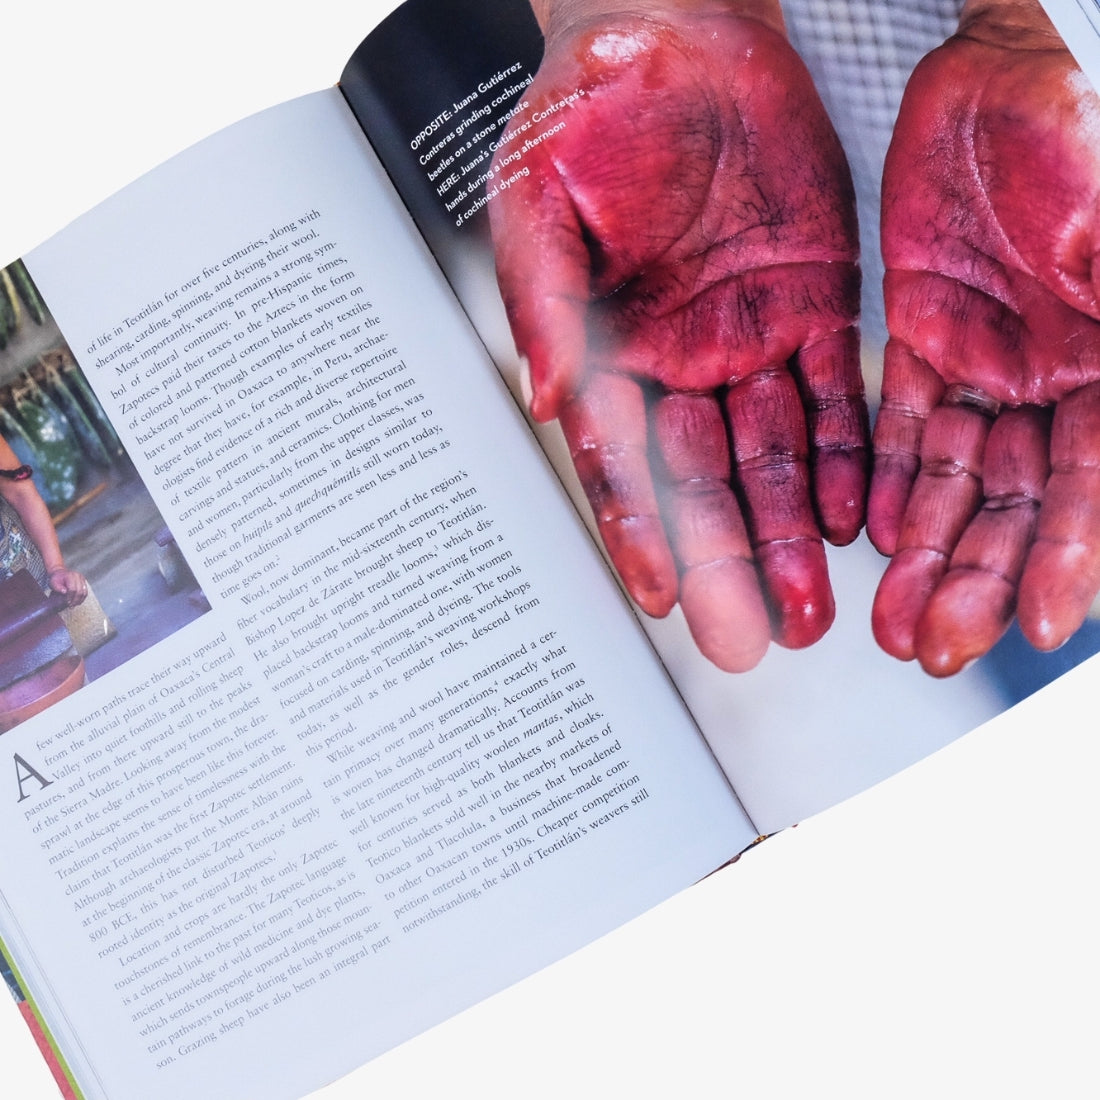 True Colors: World Masters of Natural Dyes and Pigments by Keith Recker